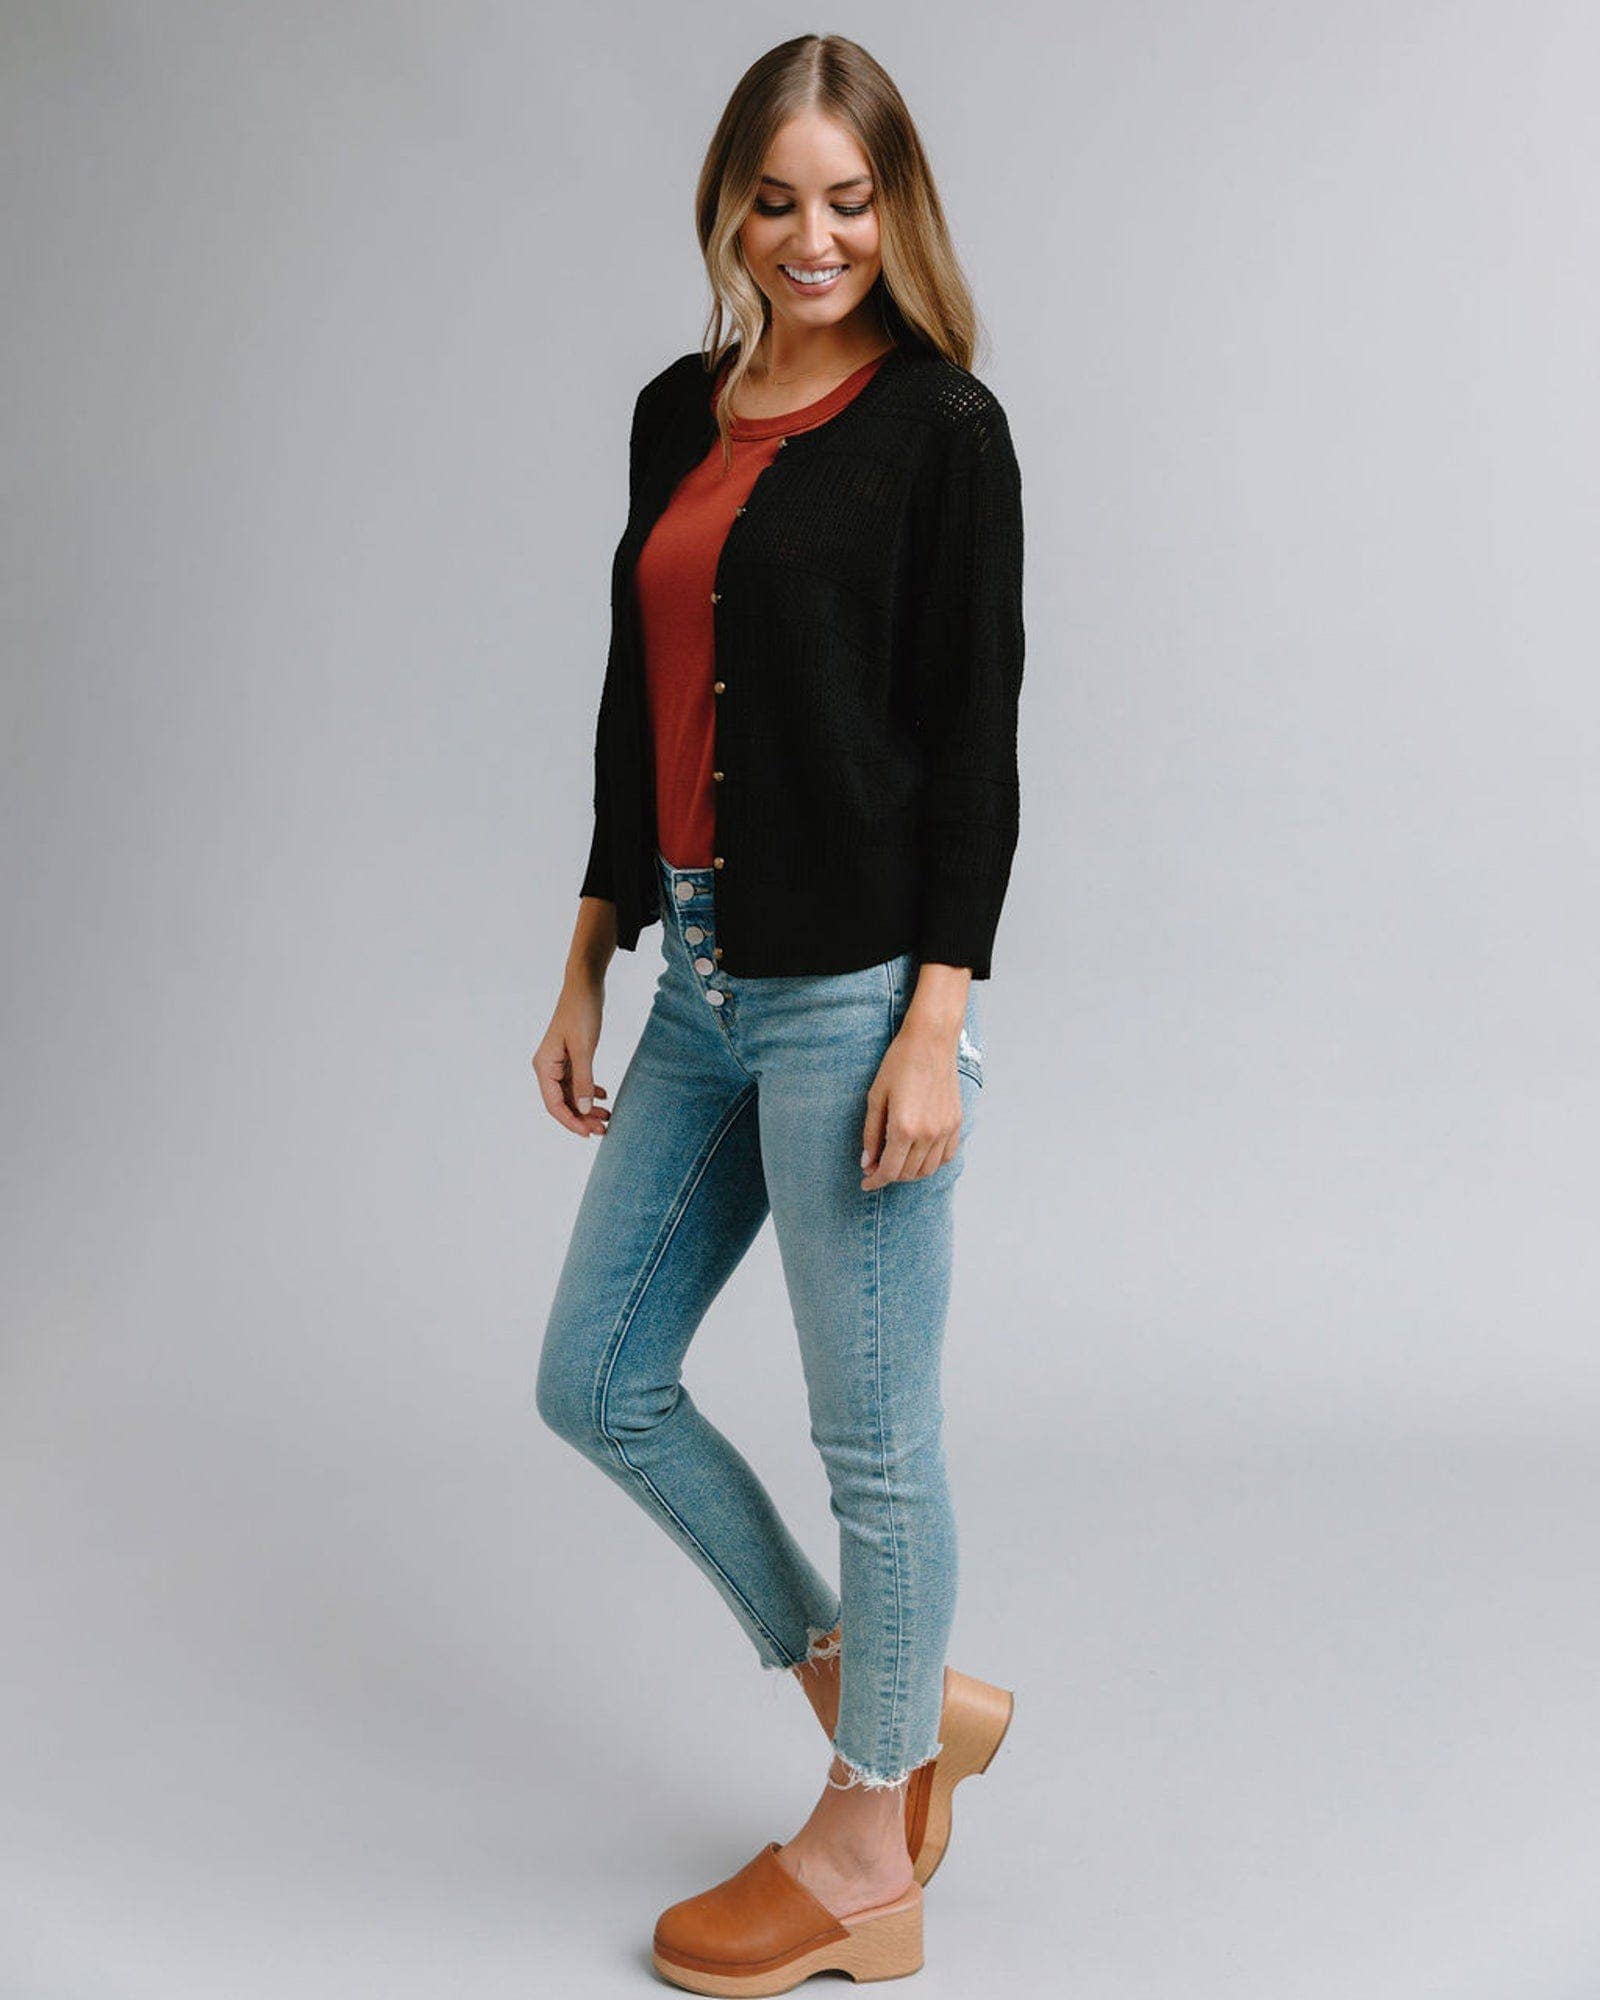 Mixed Texture Sweater: Black Beauty Spring-Summer Downeast